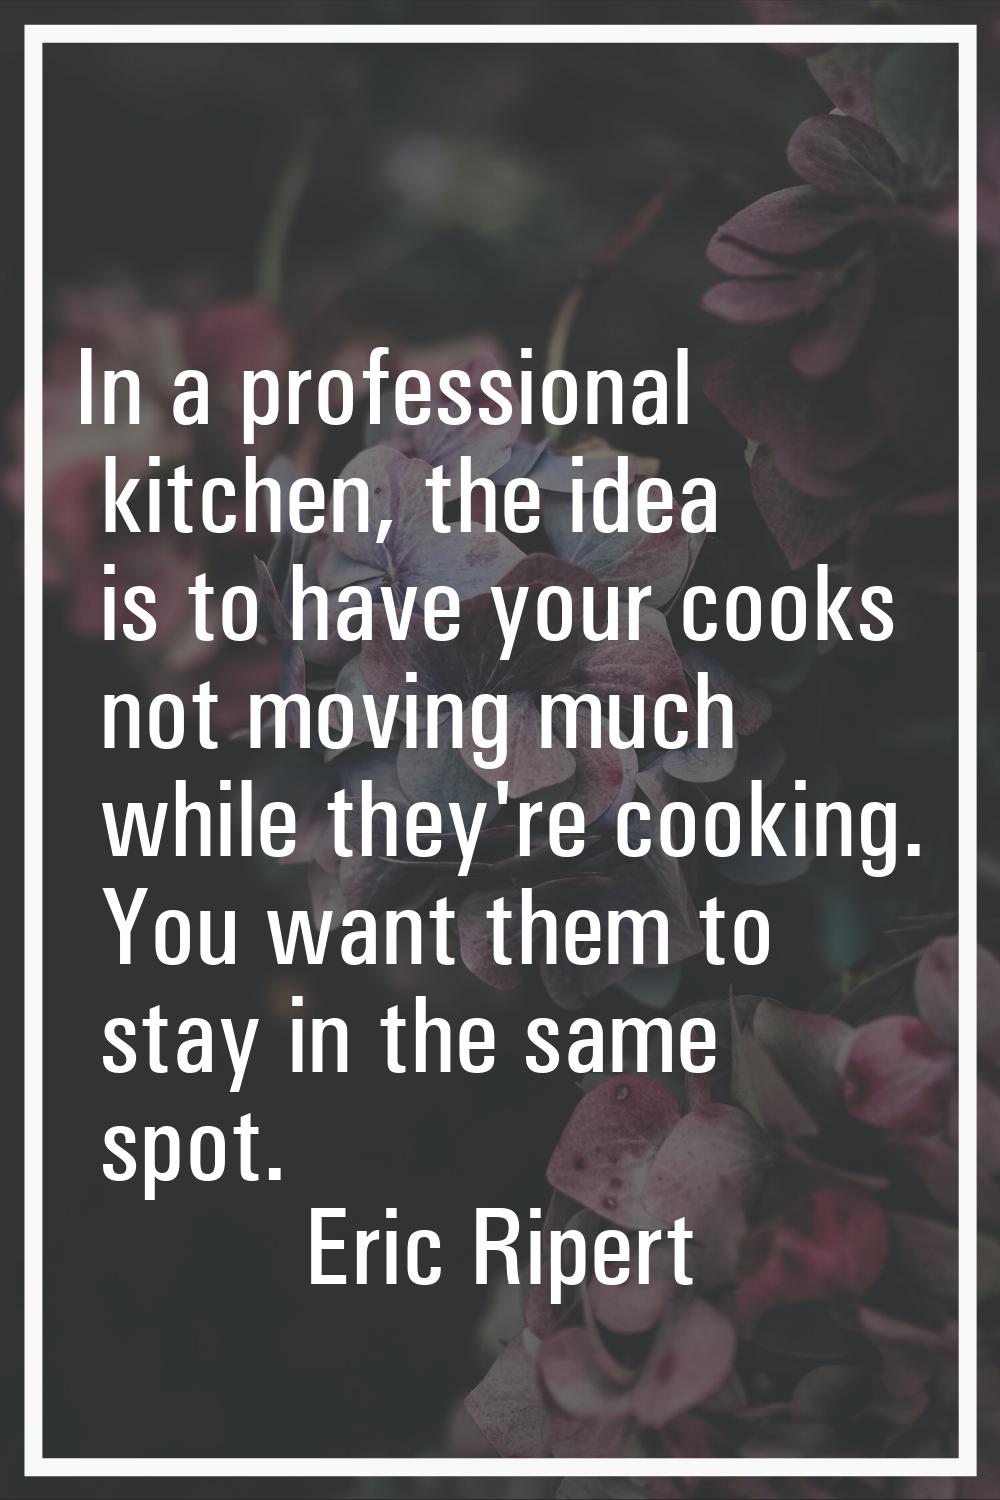 In a professional kitchen, the idea is to have your cooks not moving much while they're cooking. Yo